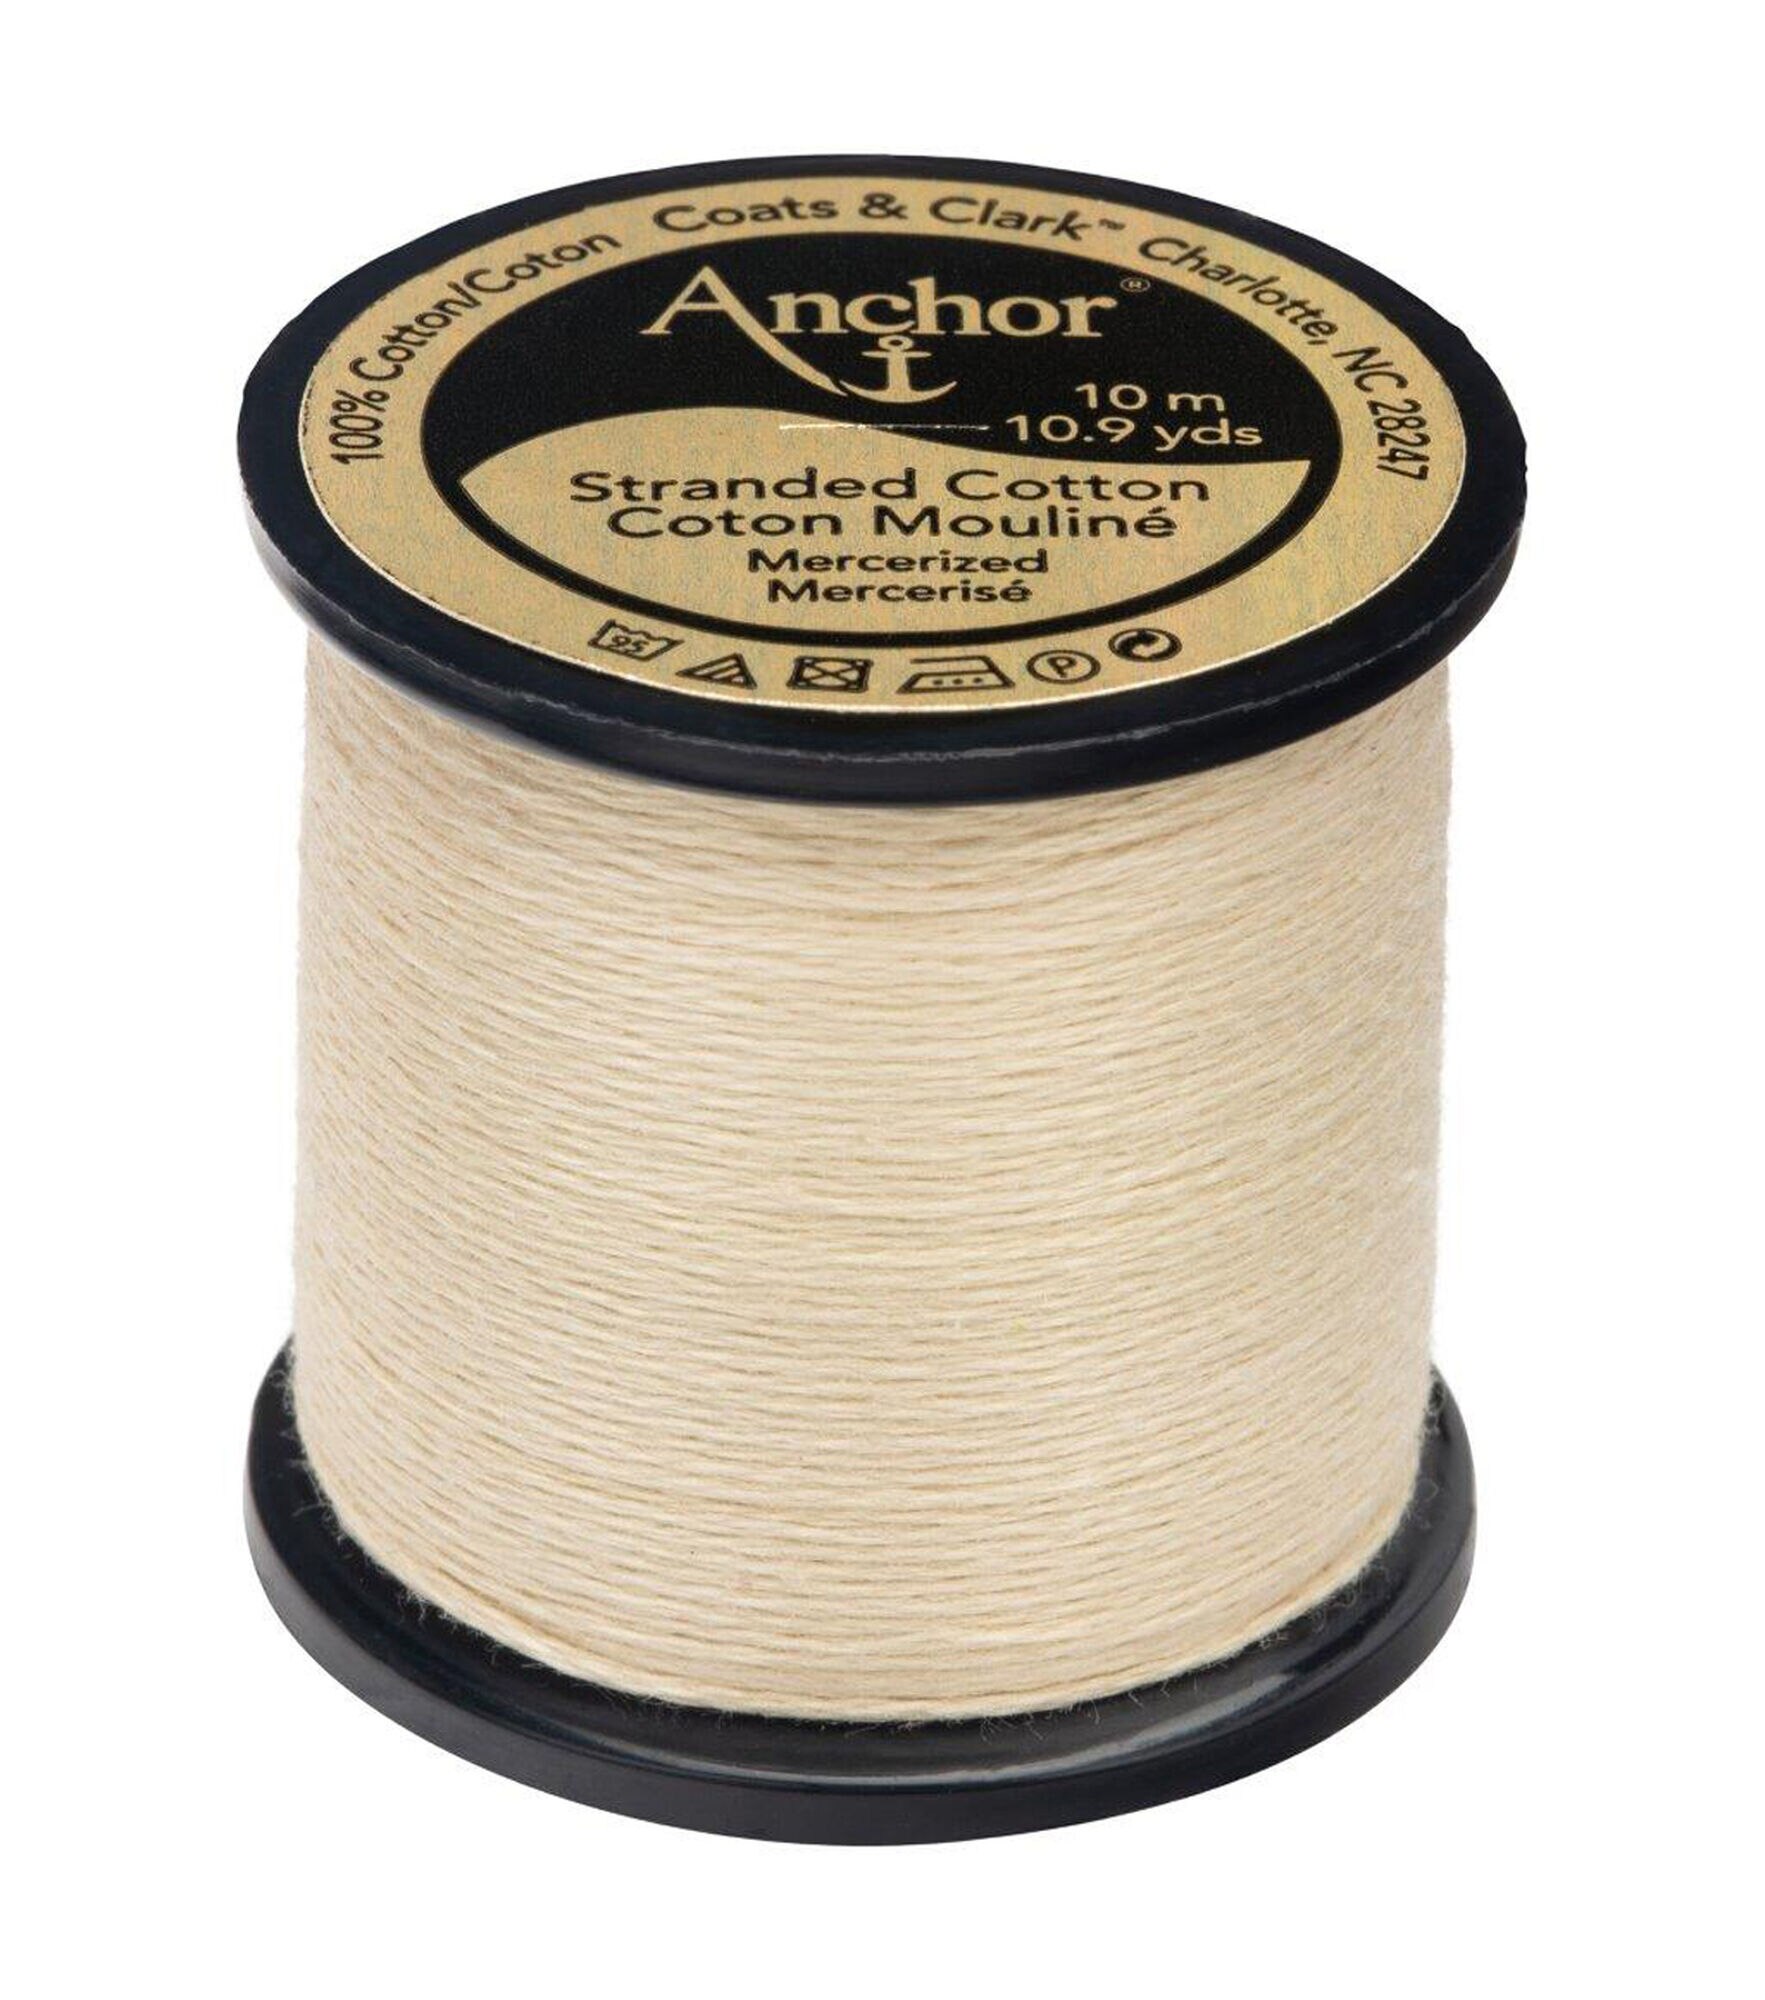 Anchor Cotton 10.9yd Neutral Cotton Embroidery Floss, 885 Sand Stone Light, hi-res